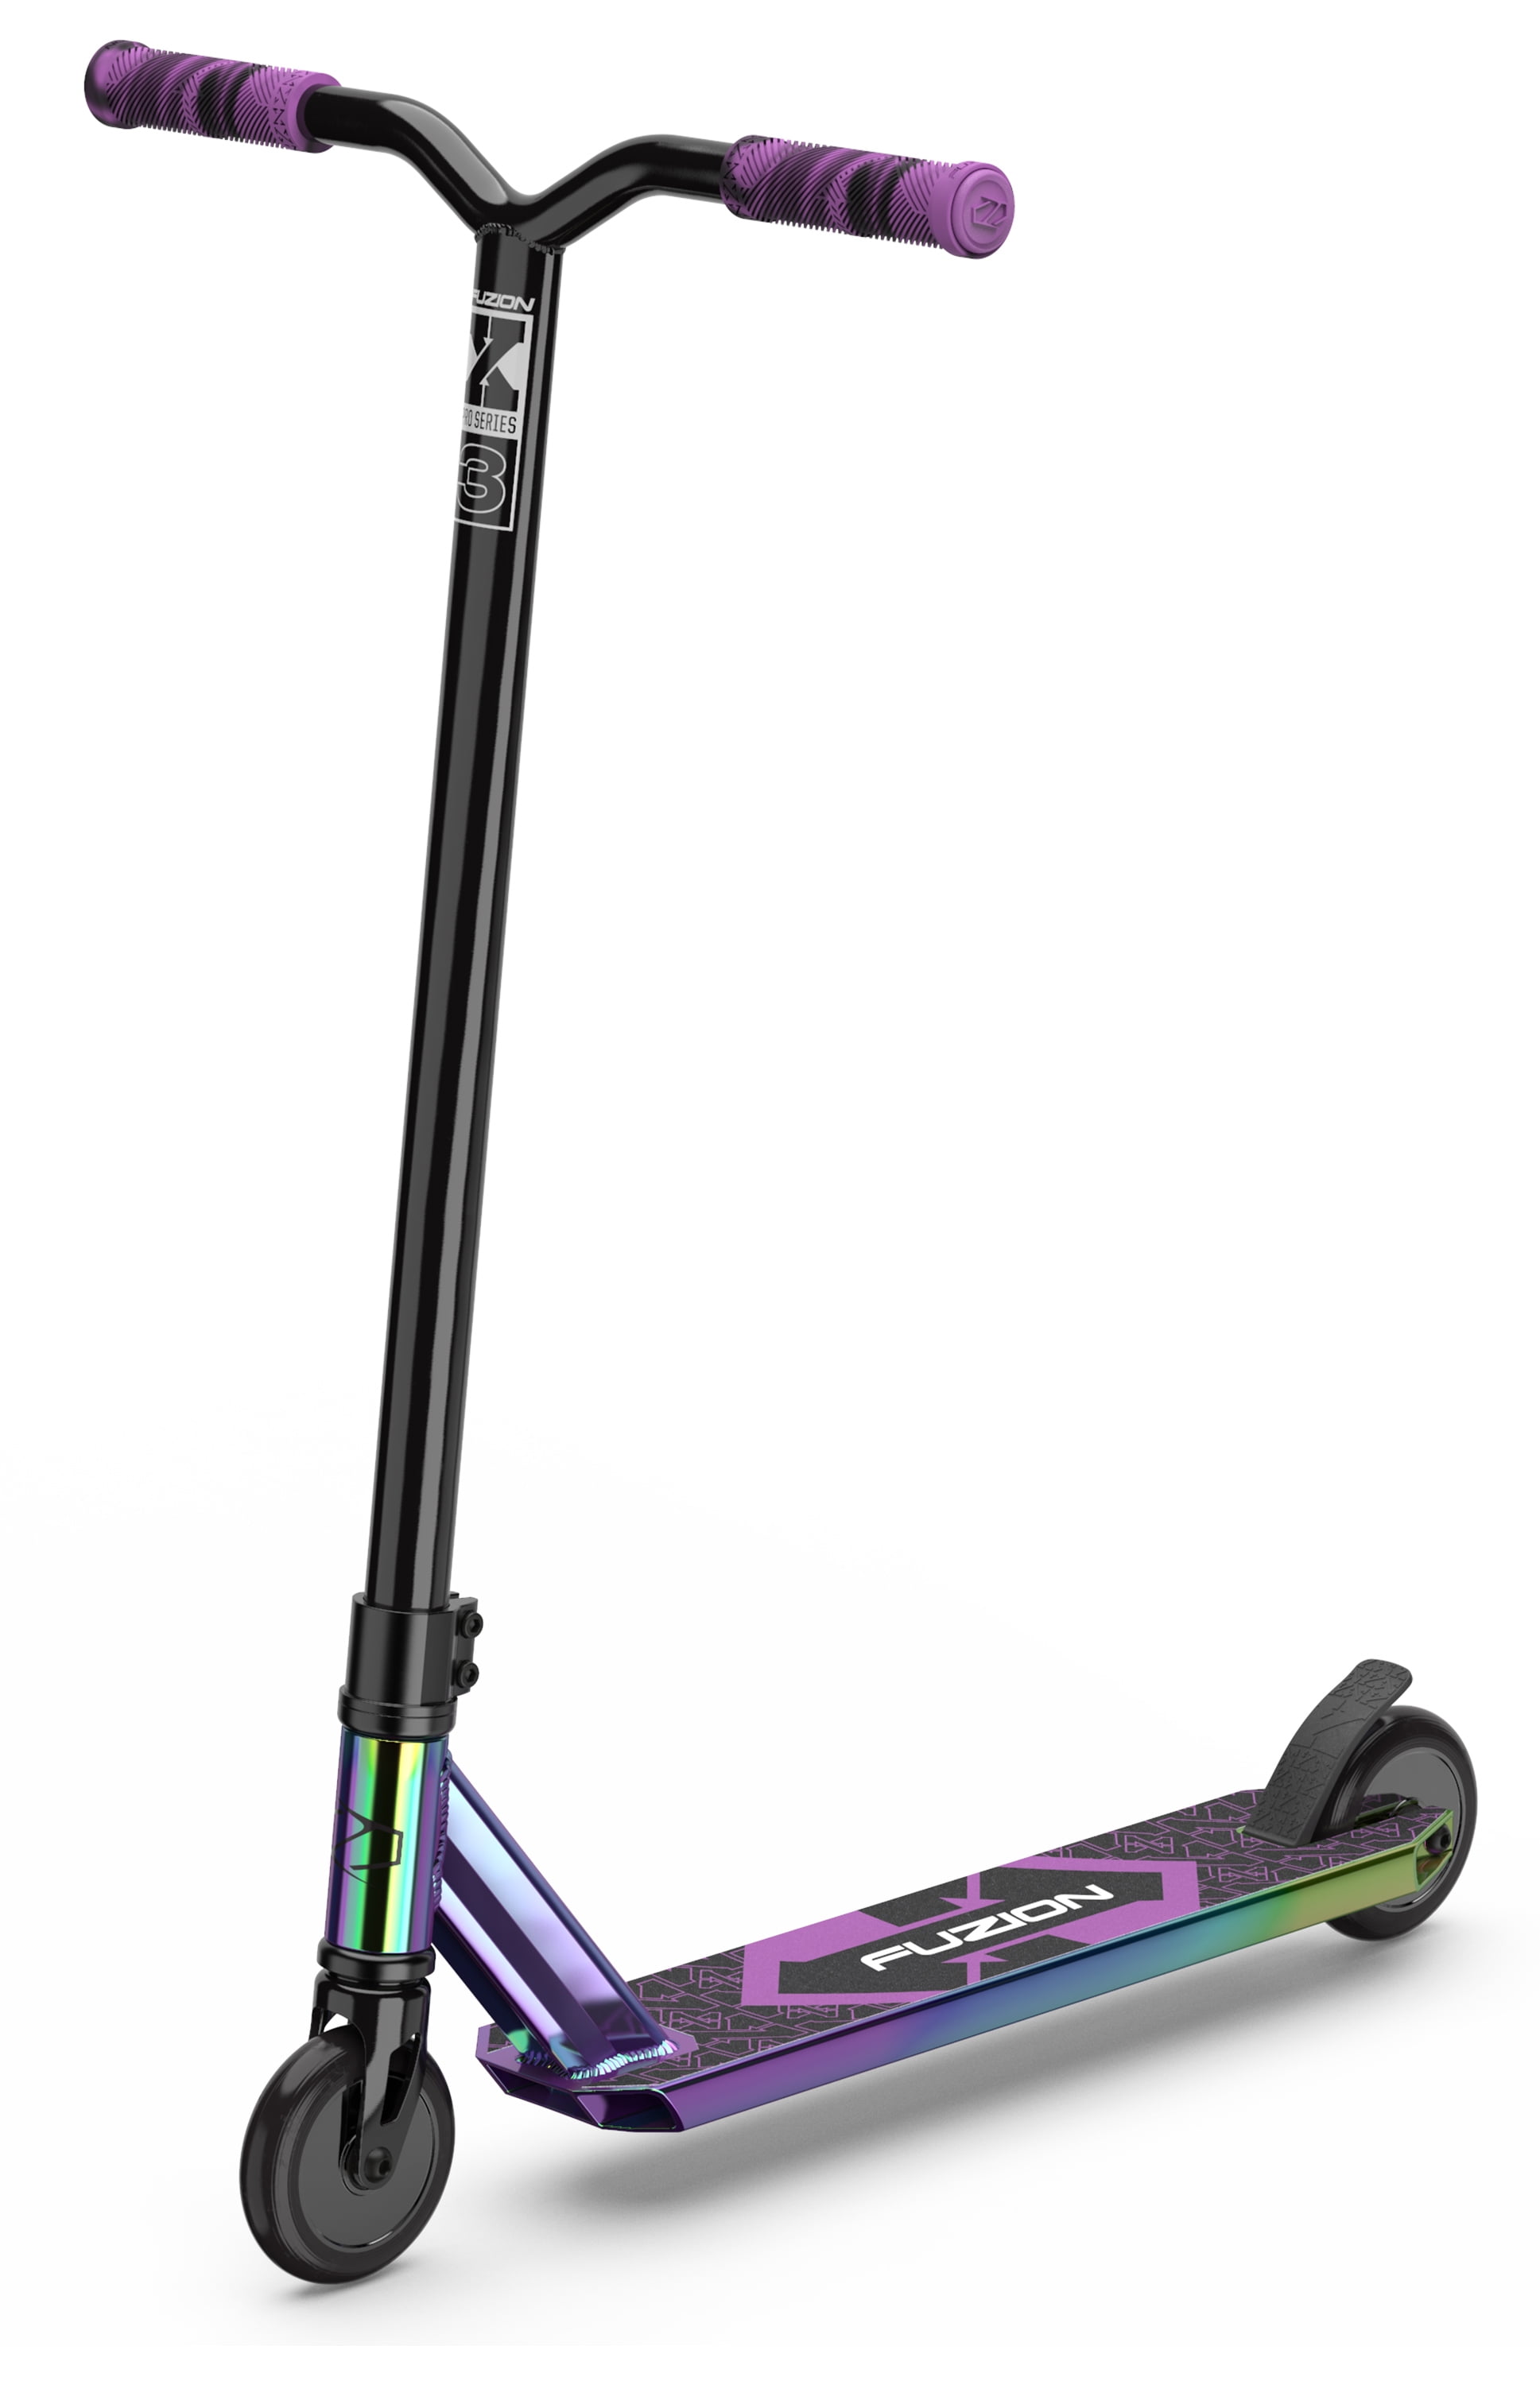 Teens High Performance Kick Scooter for Skatepark Street Boys Girls Albott Pro Scooter Complete Trick Scooter Freestyle Aircraf Aluminum Entry Level Stunt Scooters for Kids 8 Years and Up